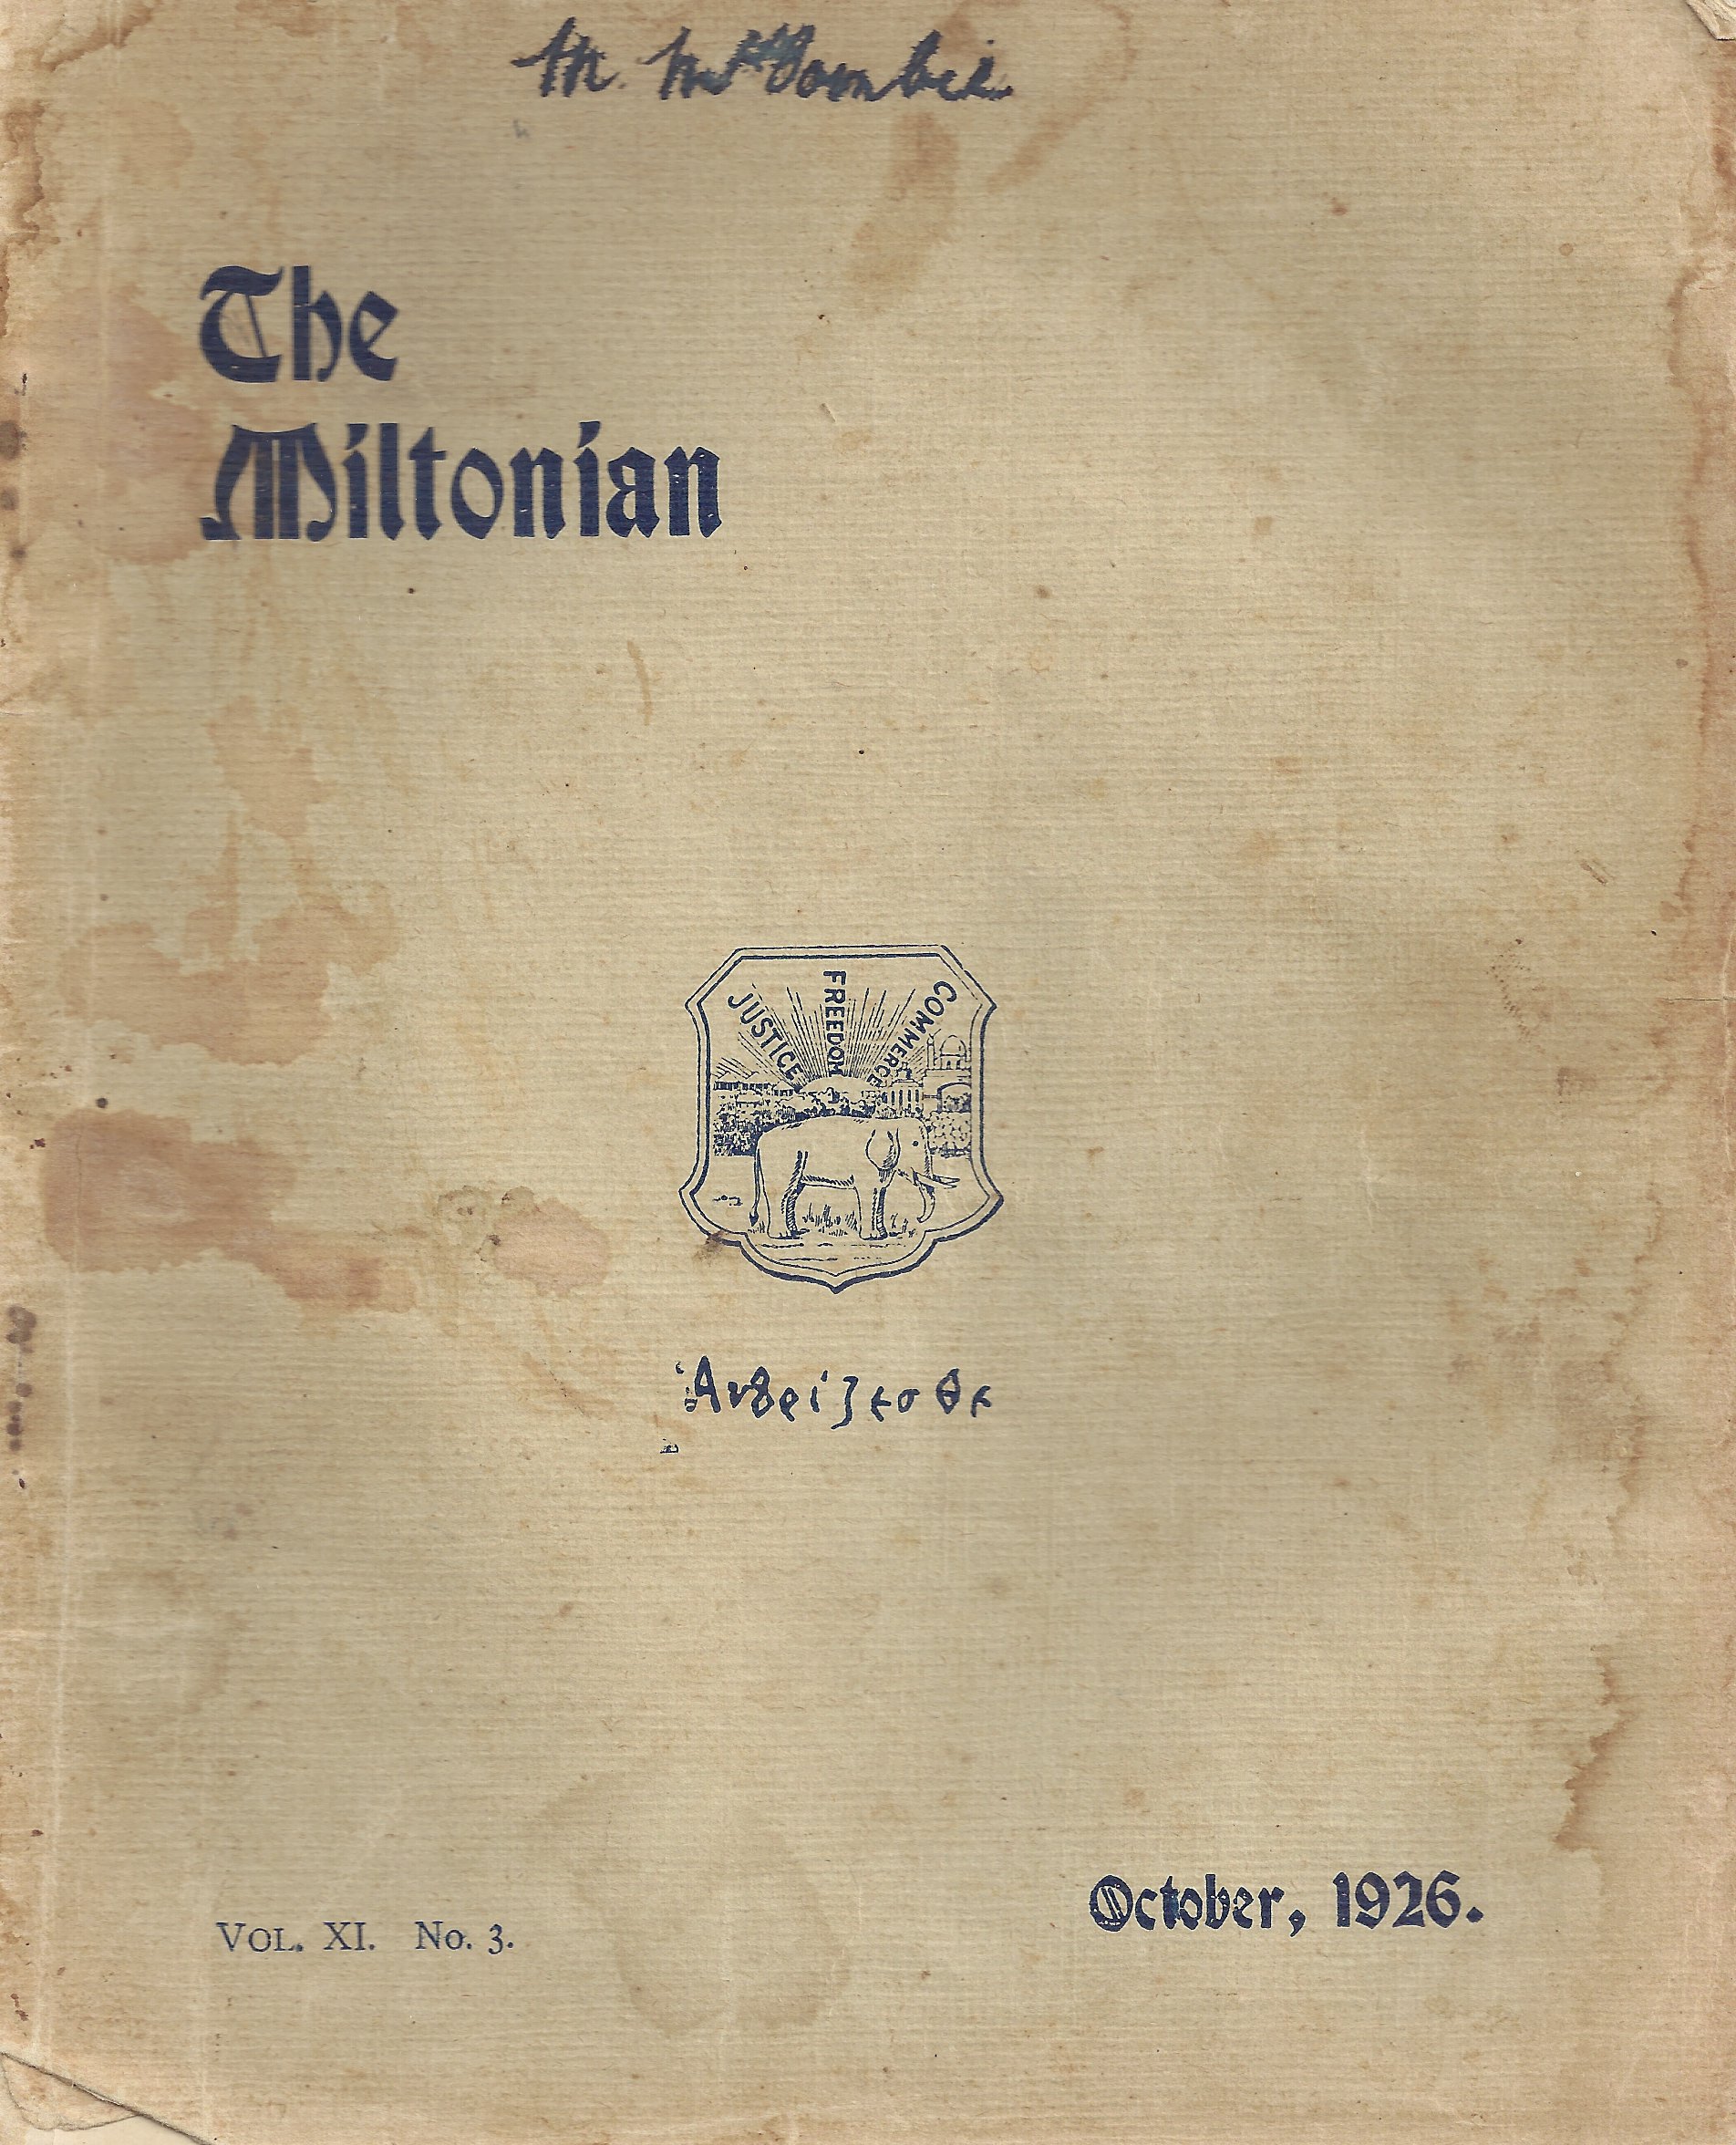 file:///C:/Users/AdrianMM/Documents/My Web S1926_cover